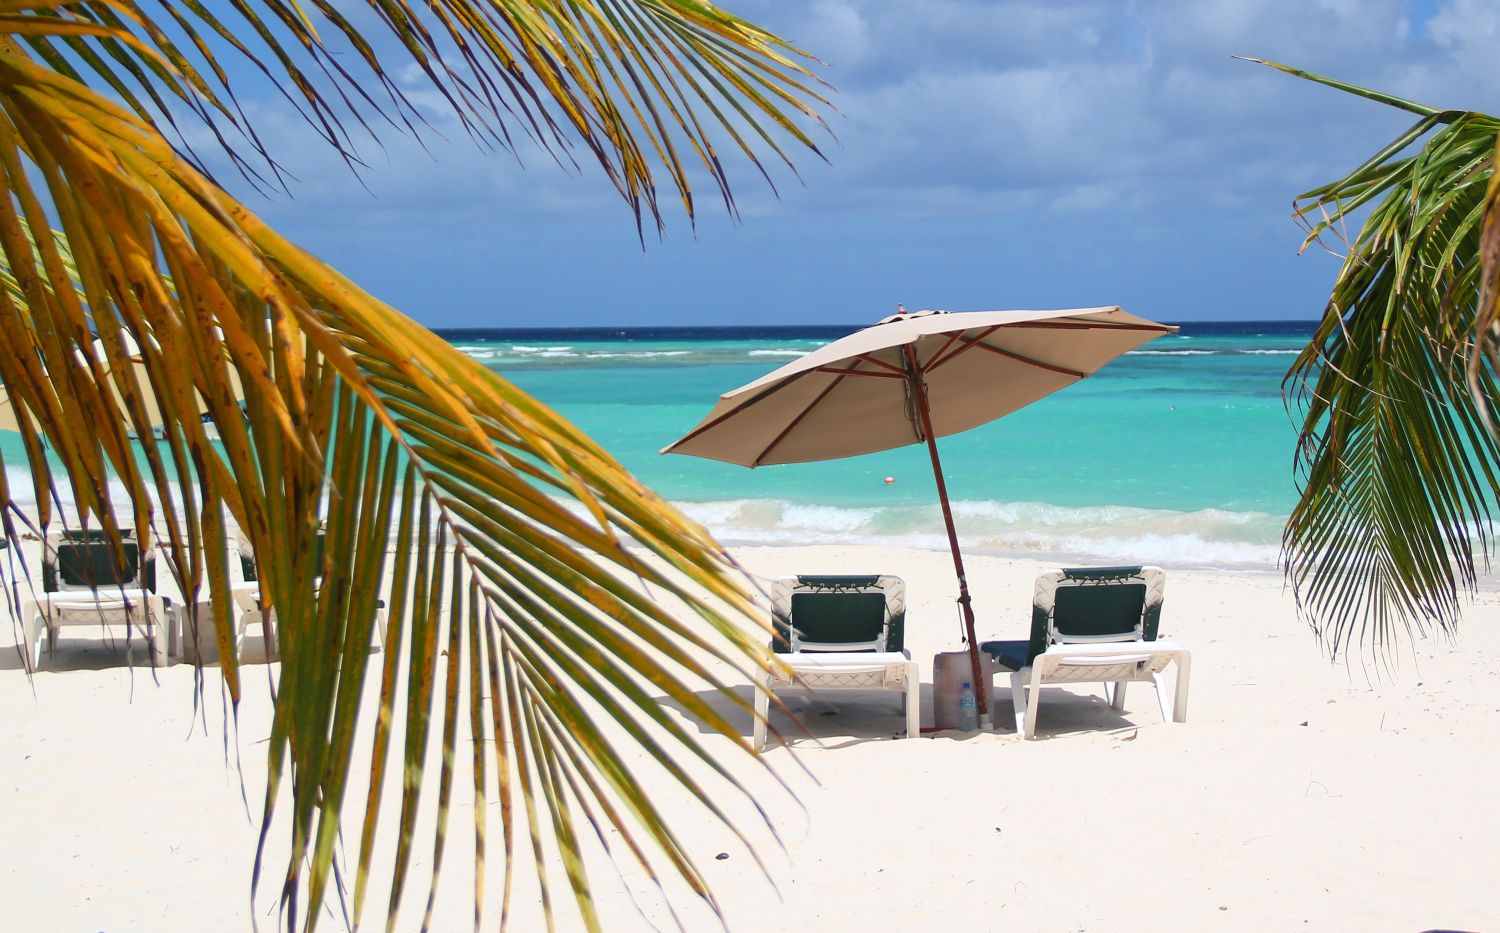 Barbados among 'Most Relaxing Beaches'